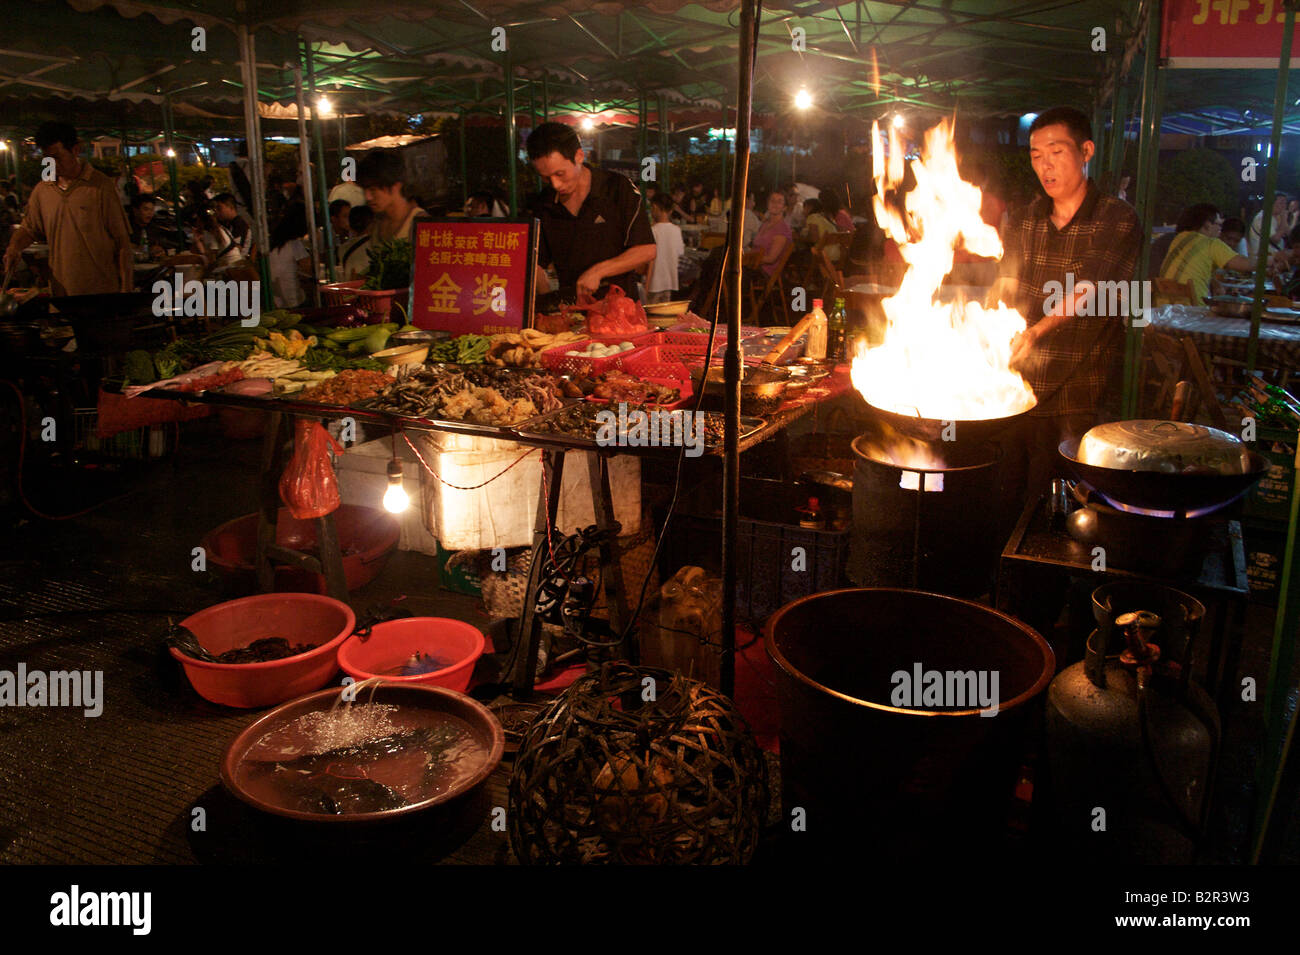 Open air restaurant with a cook wielding a flaming wok and fresh  ingredients on display at night Yangshuo Guangxi China Stock Photo - Alamy